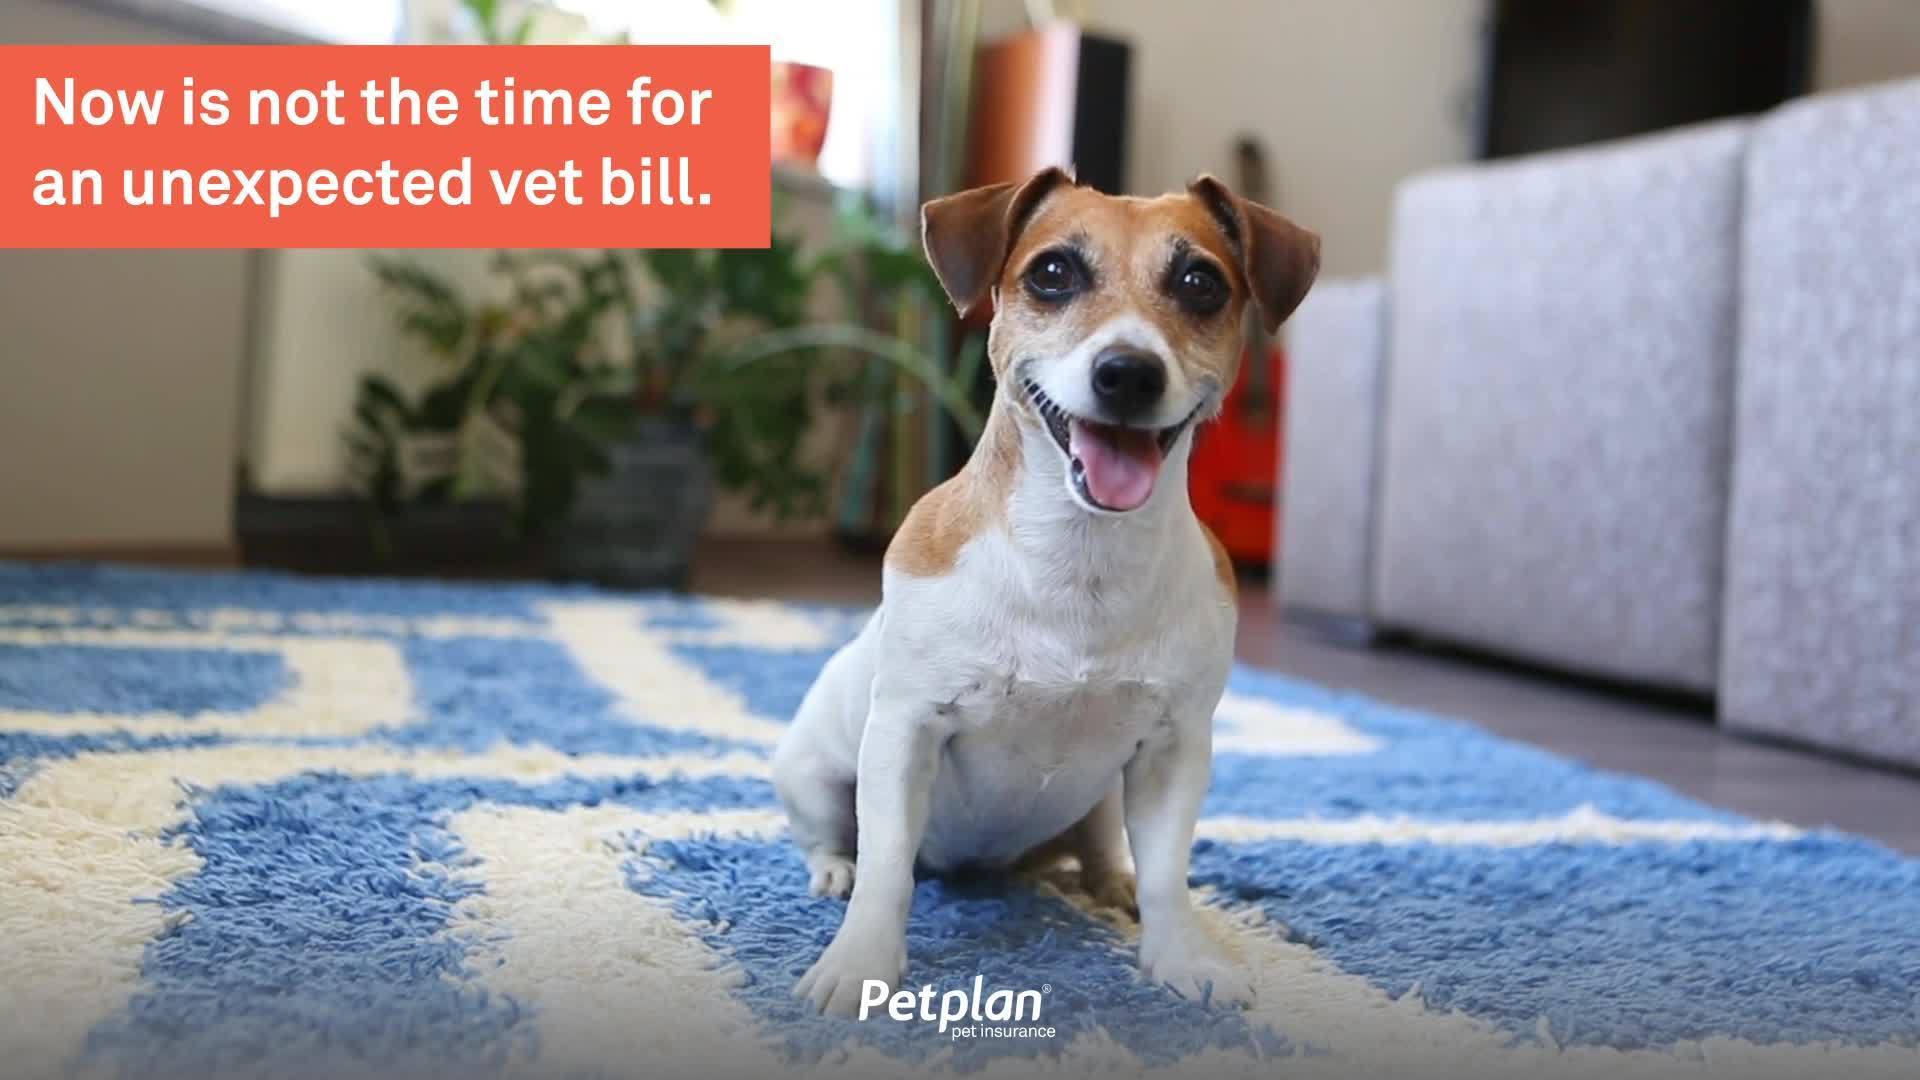 get_the_best_Can Your Pet_ad